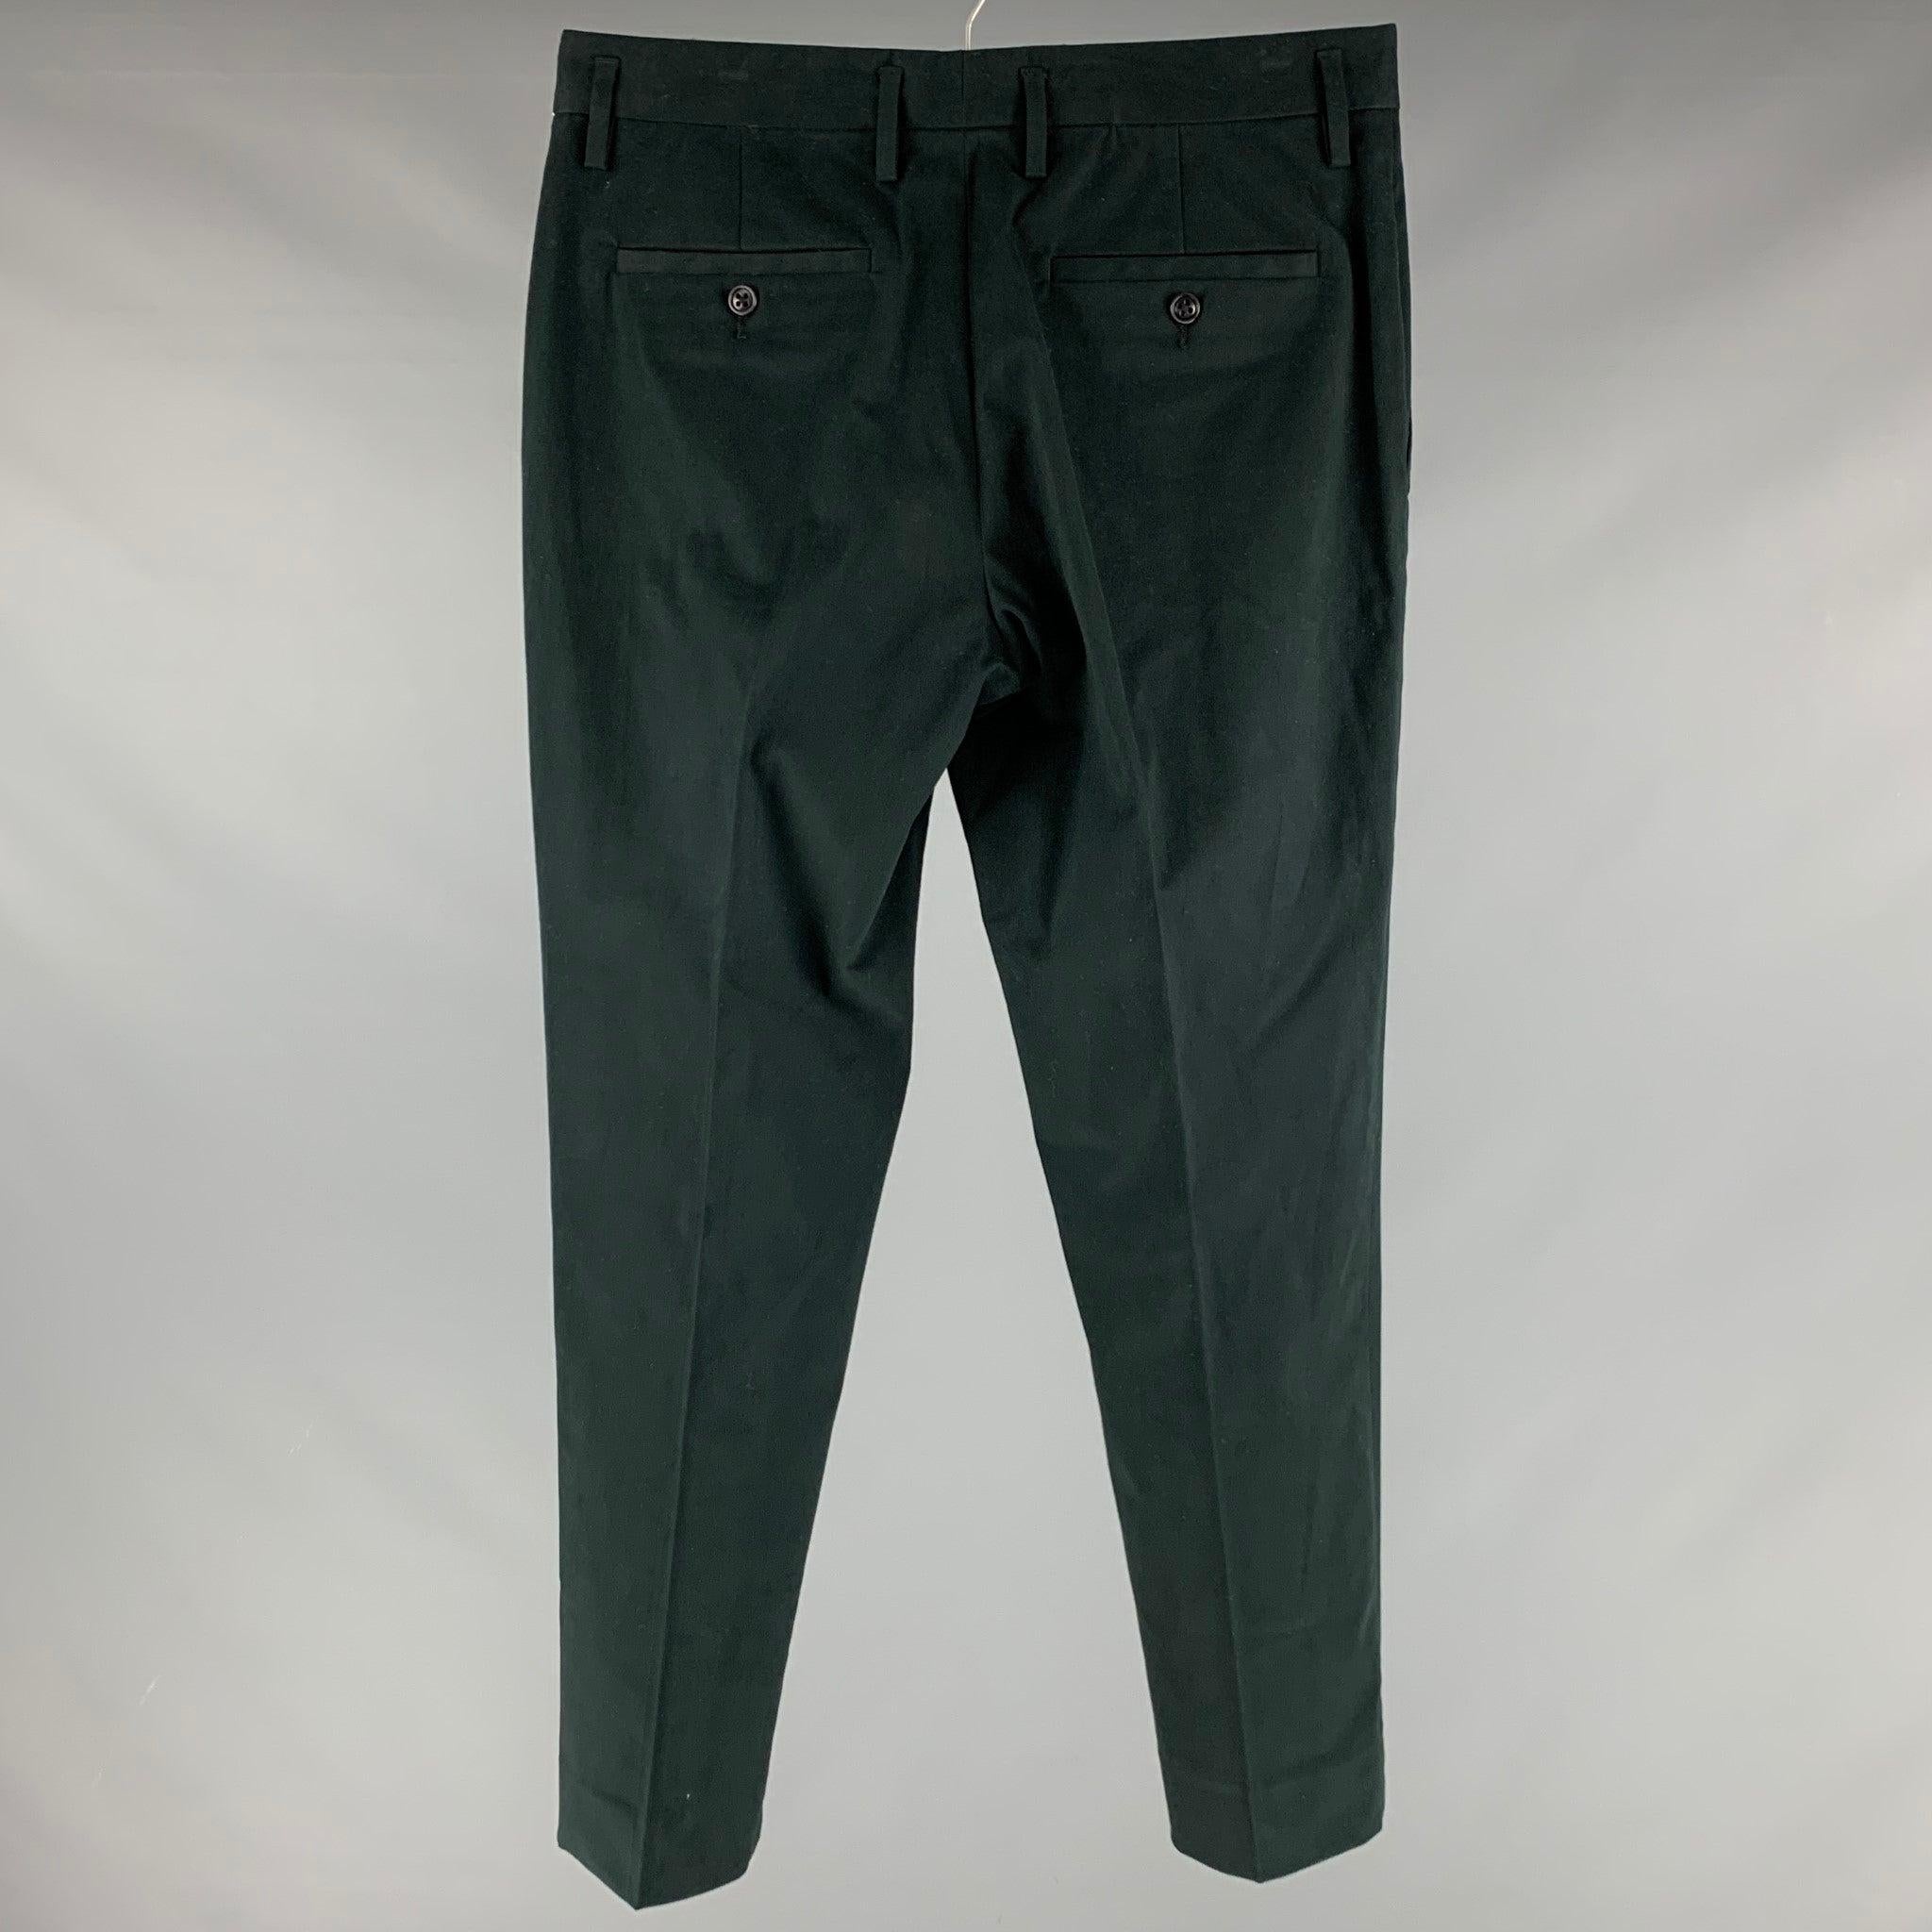 MARC JACOBS dress pants
in a green cotton blend velvet fabric featuring four pockets, and a zip fly closure. Made in Italy.Excellent Pre-Owned Condition. 

Marked:  48 

Measurements: 
 Waist: 32 inches Rise: 8 inches Inseam: 28 inches 
 
 
